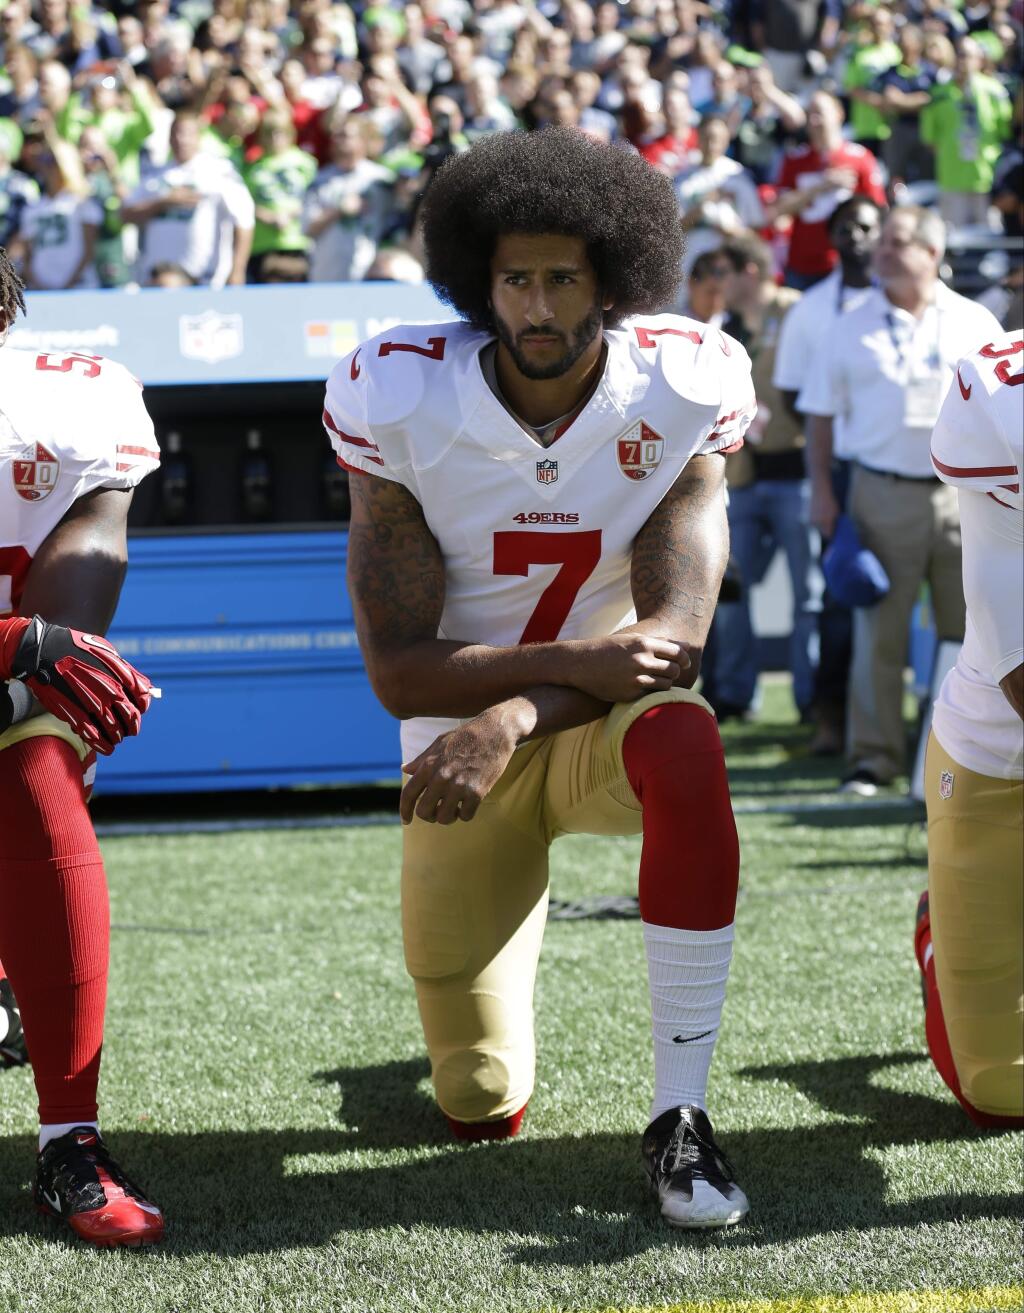 In this Sept. 25, 2016, file photo, the San Francisco 49ers' Colin Kaepernick kneels during the national anthem before a game against the Seattle Seahawks in Seattle. (AP Photo/Ted S. Warren, File)